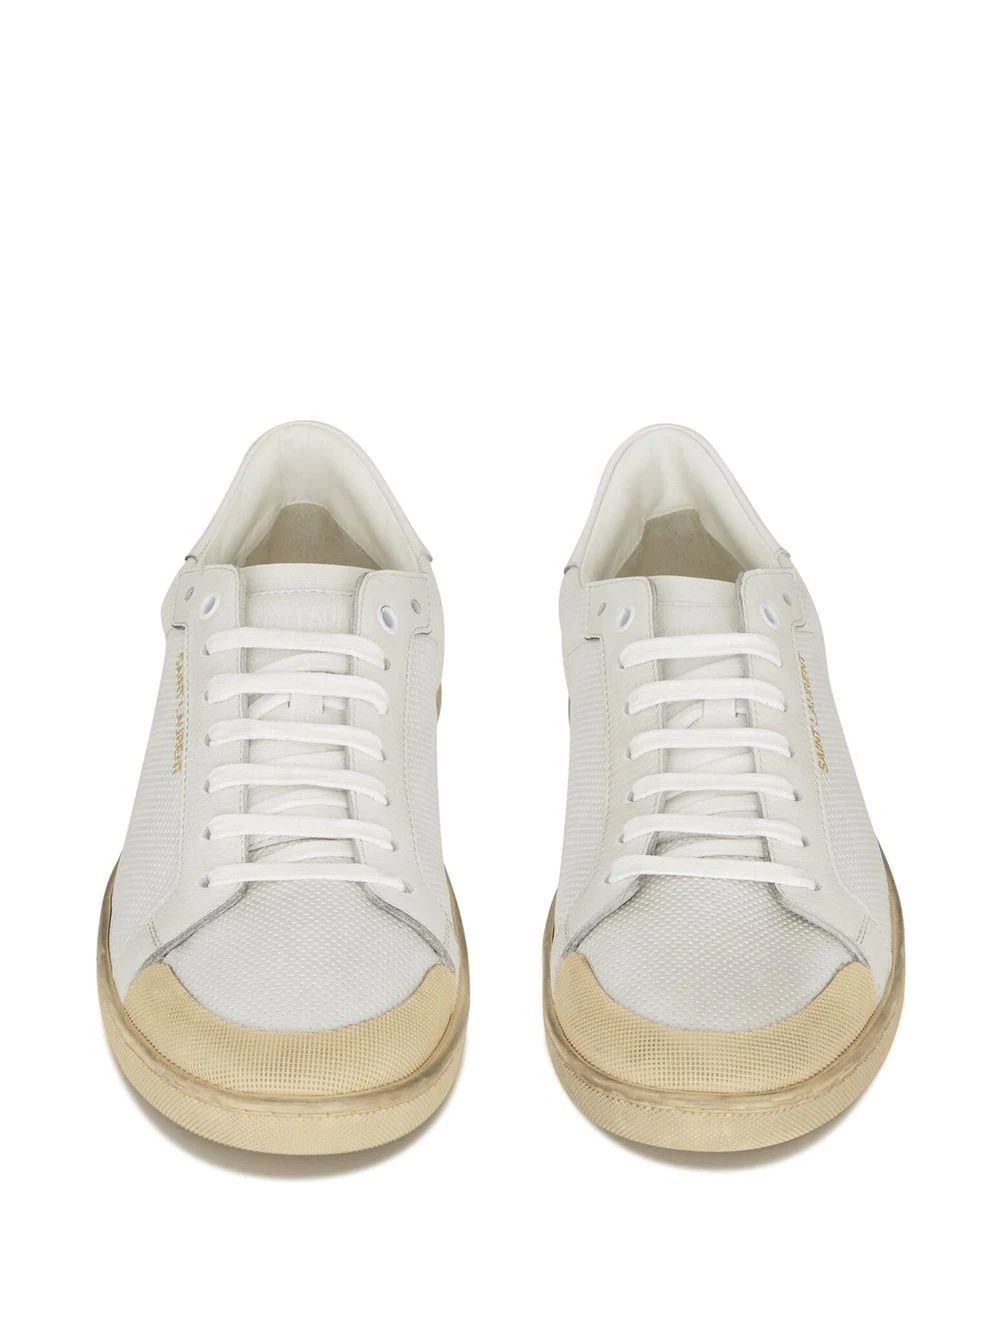 Saint Laurent Court White Leather Low Top Sneakers New Size 43 US 10